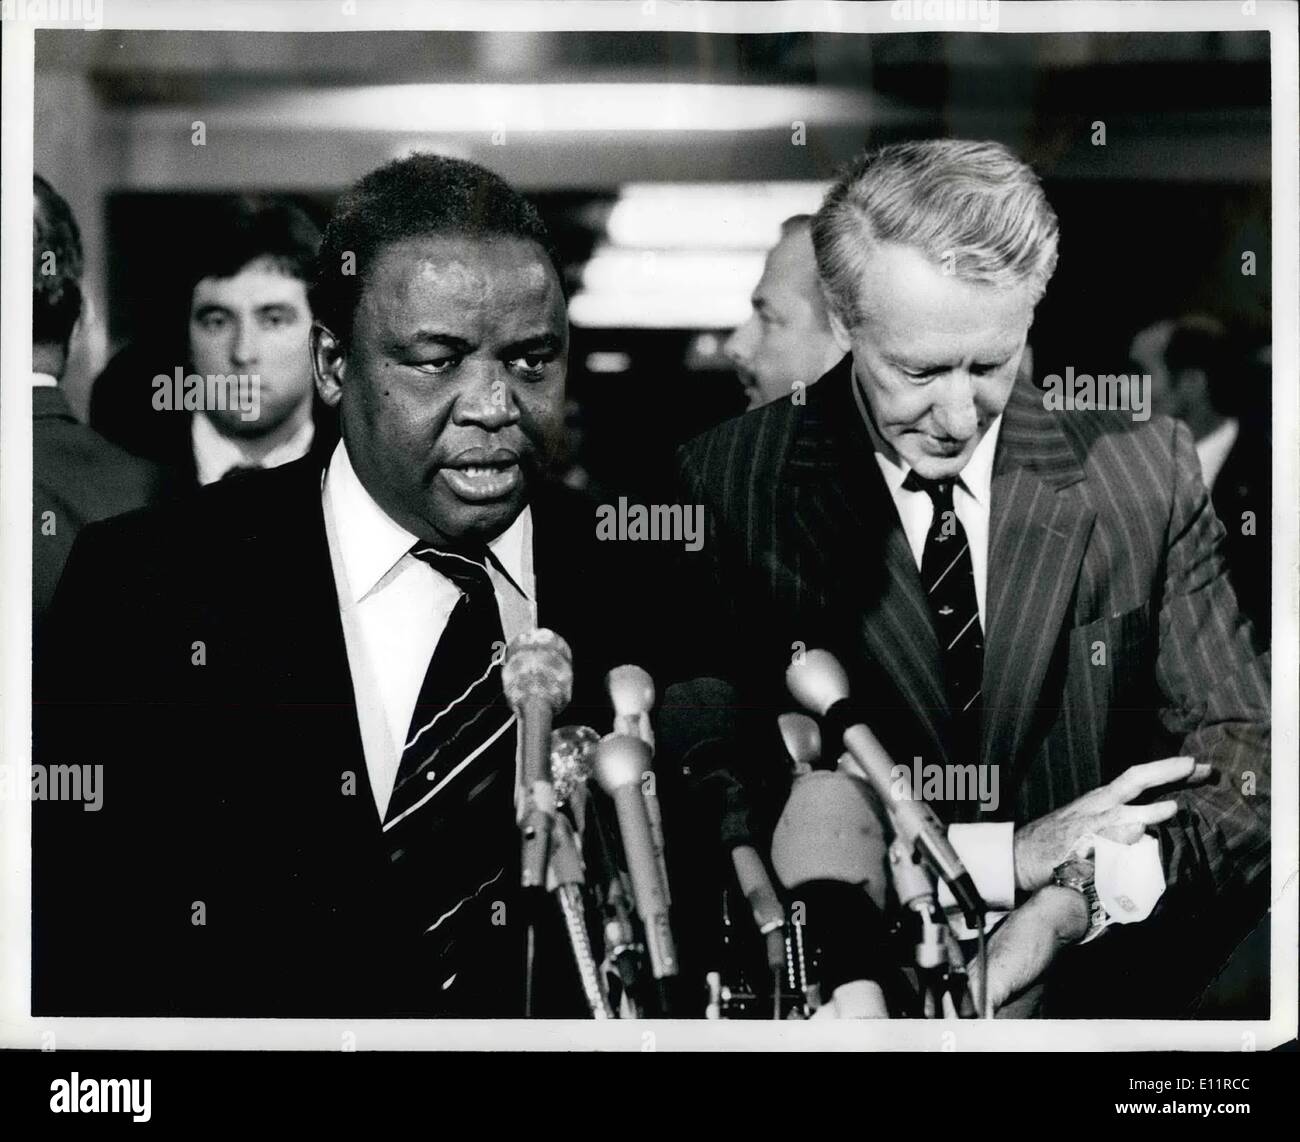 Oct. 10, 1979 - THE STATE DEPT. WASHINGTON D.C. Two of the Internal settlement Leaders, the Rev. Ndabaningi Sithole and Prime Minister IAN SMITH, met today with Secretary of State Cyrus Vance. Although they met with U.S. Secretary for nearly two hours. The U.S. Stated there was no change in American Policy Toward Rhodesia. O.P.S. left: Rev. Ndabaningi Sithole right: Prime Minister Ian Smith talking with reporters after their fruitless meeting at the State Dept. Stock Photo